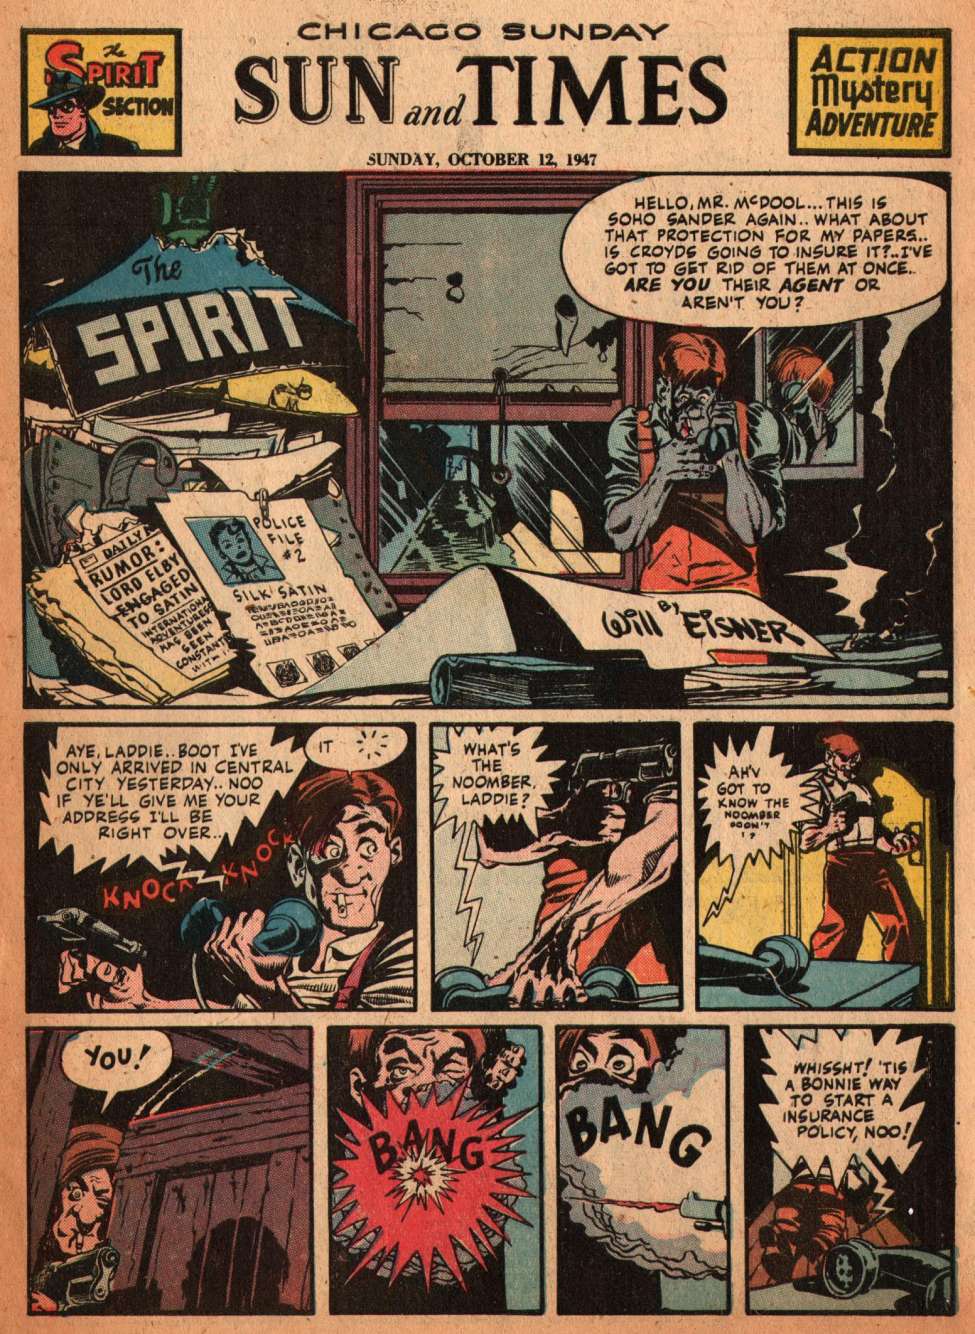 Book Cover For The Spirit (1947-10-12) - Chicago Sun